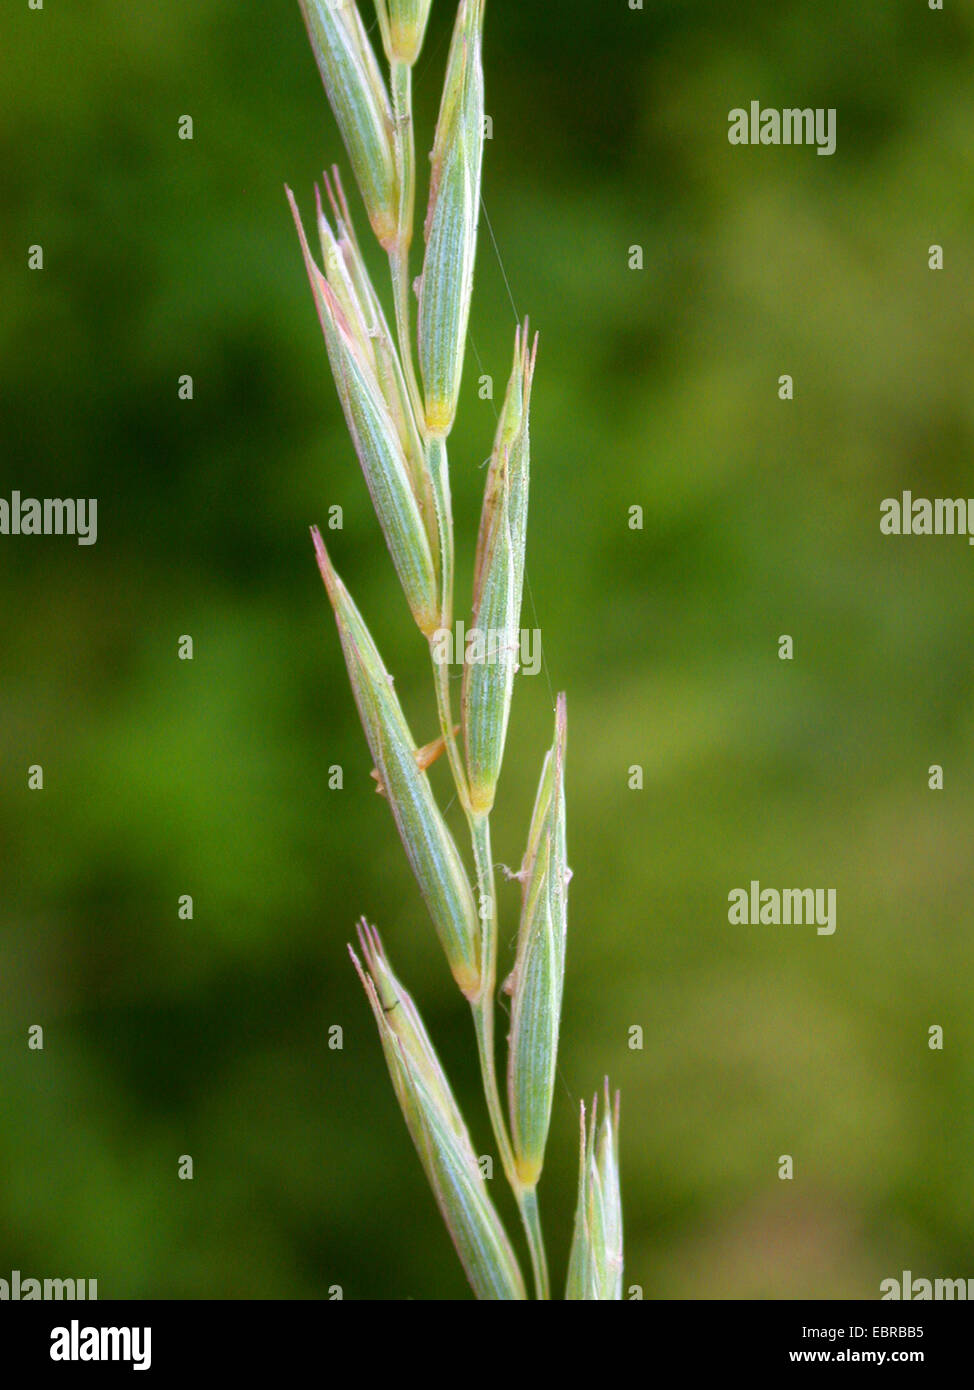 Couch grass, twitch, quick grass, quitch grass, quitch, dog grass, quackgrass, scutch grass, witchgrass (Agropyron repens, Elymus repens), inflorescence, Germany, North Rhine-Westphalia Stock Photo